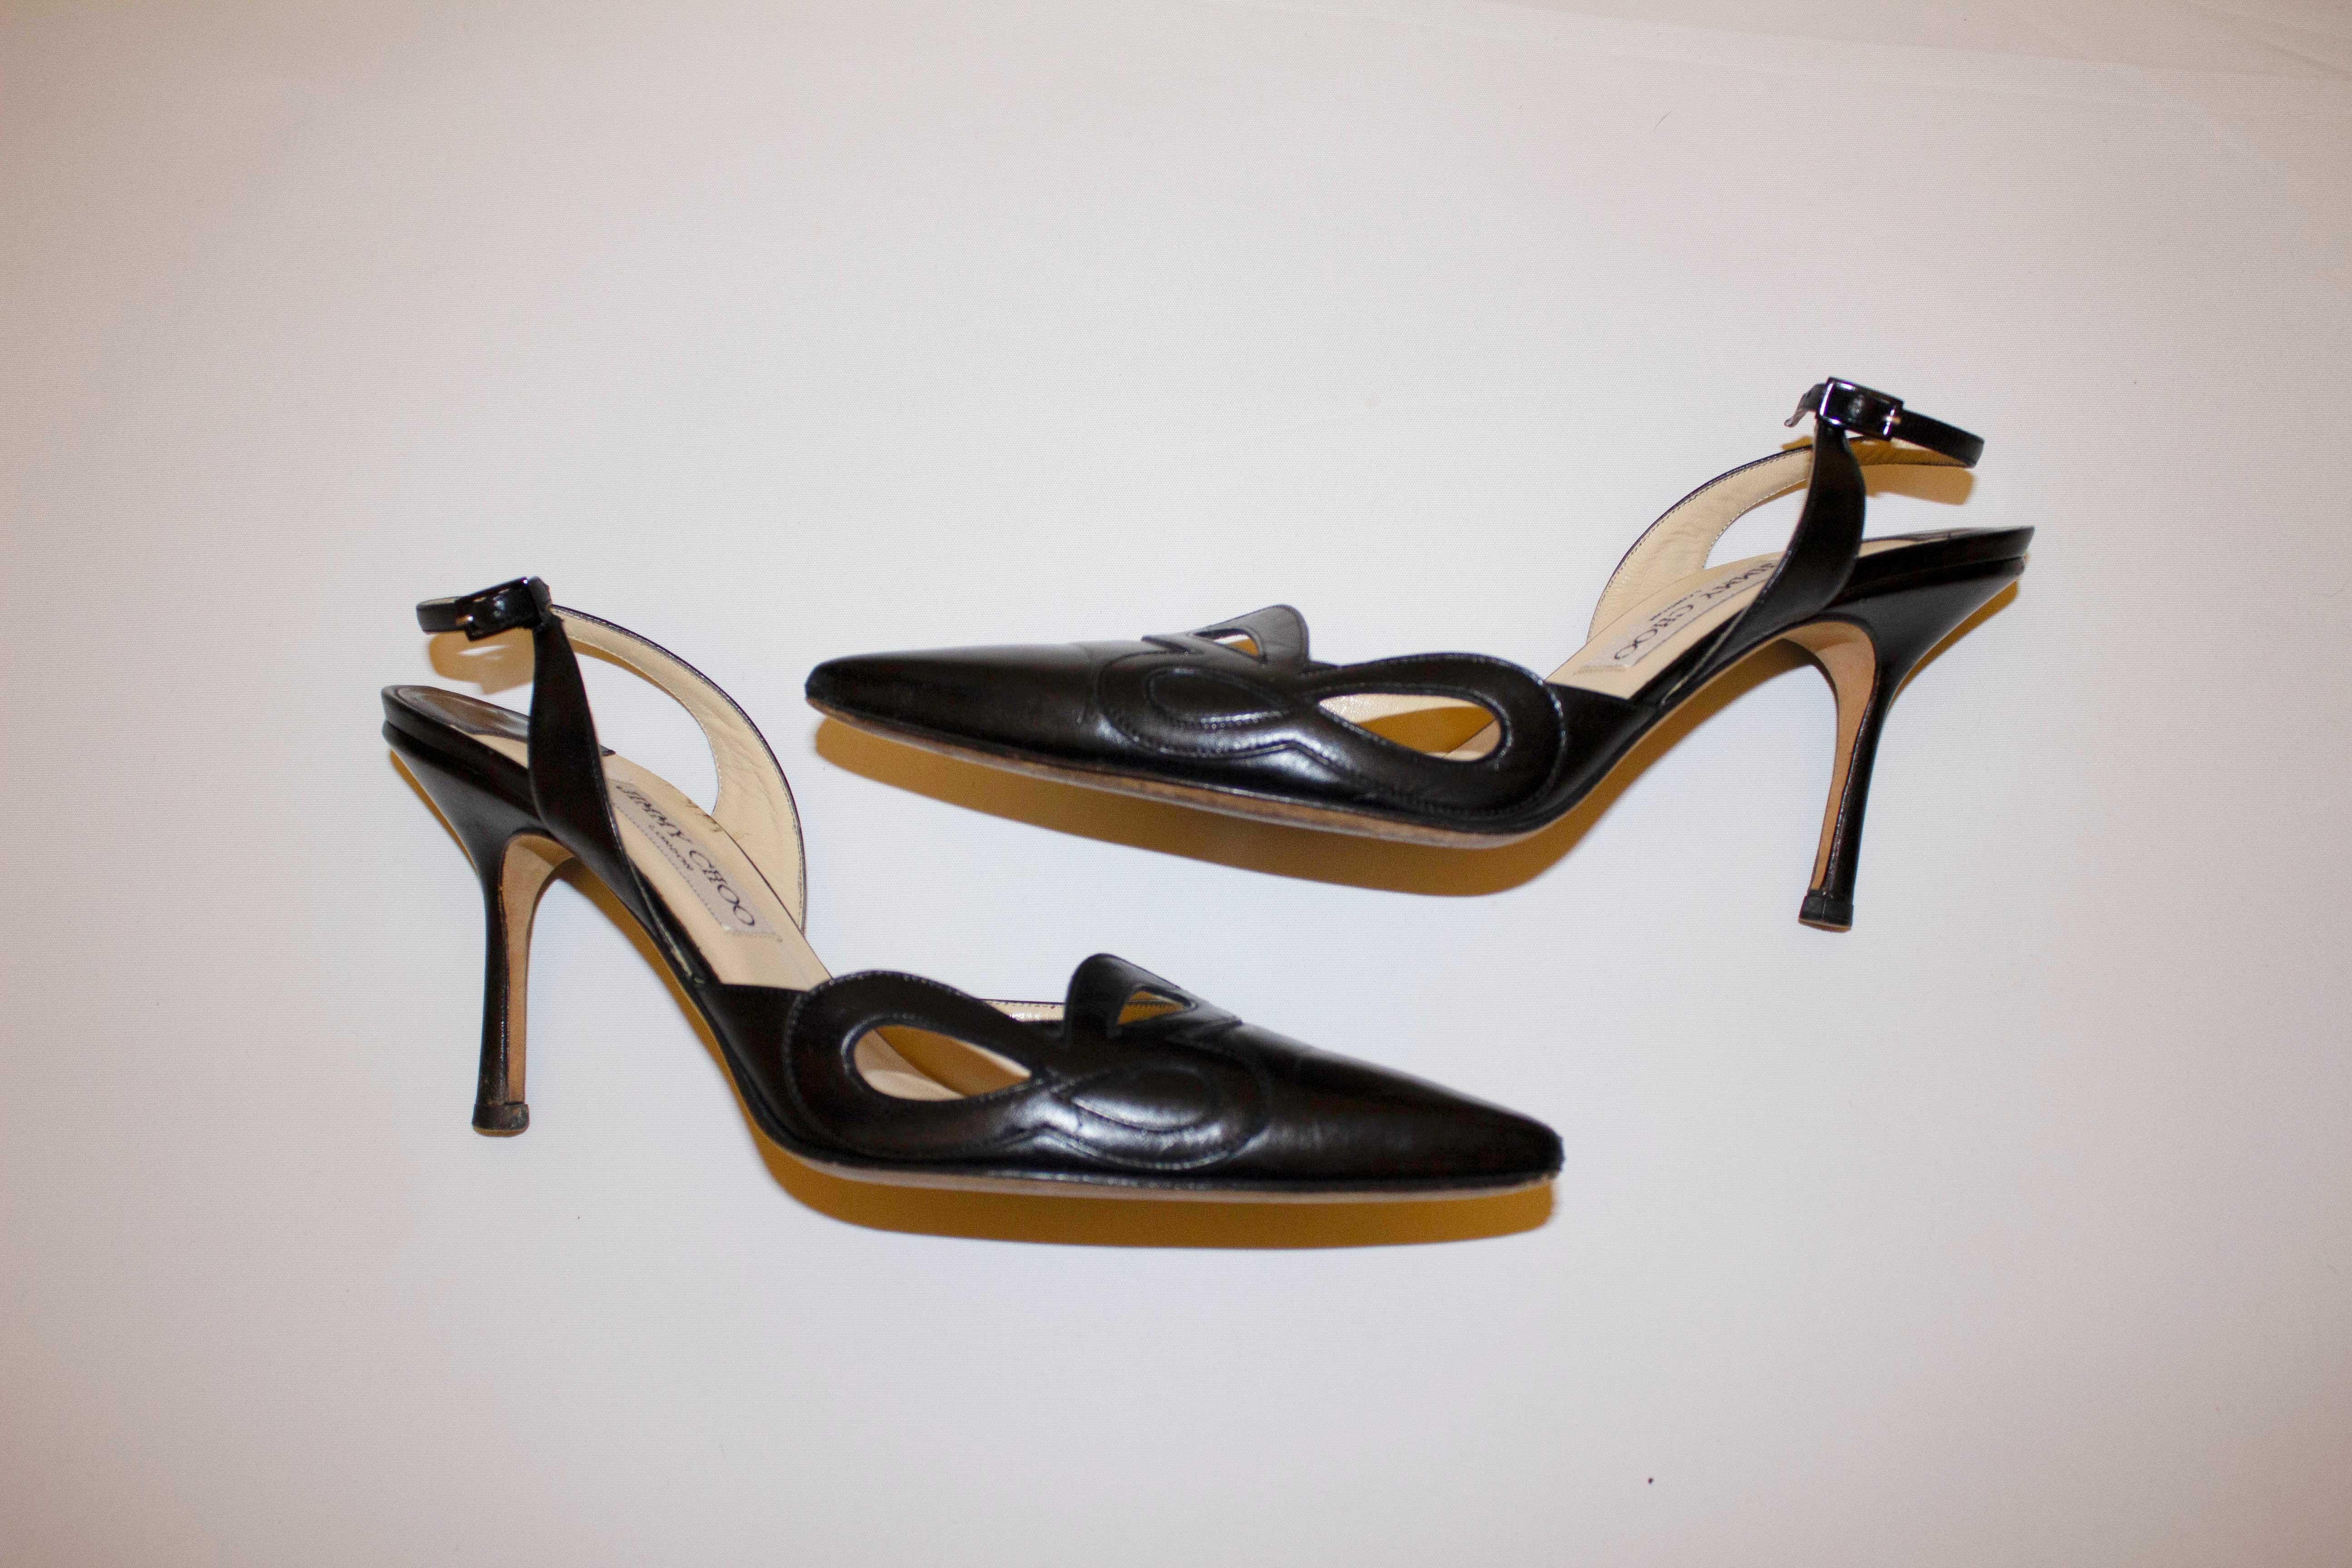 A stylish pair of sling back heels from Jimmy Choo. In black leather with cut out detail on the outer side, the heels measure nearly 4'' in height, shoe size 40. Excellent condition.